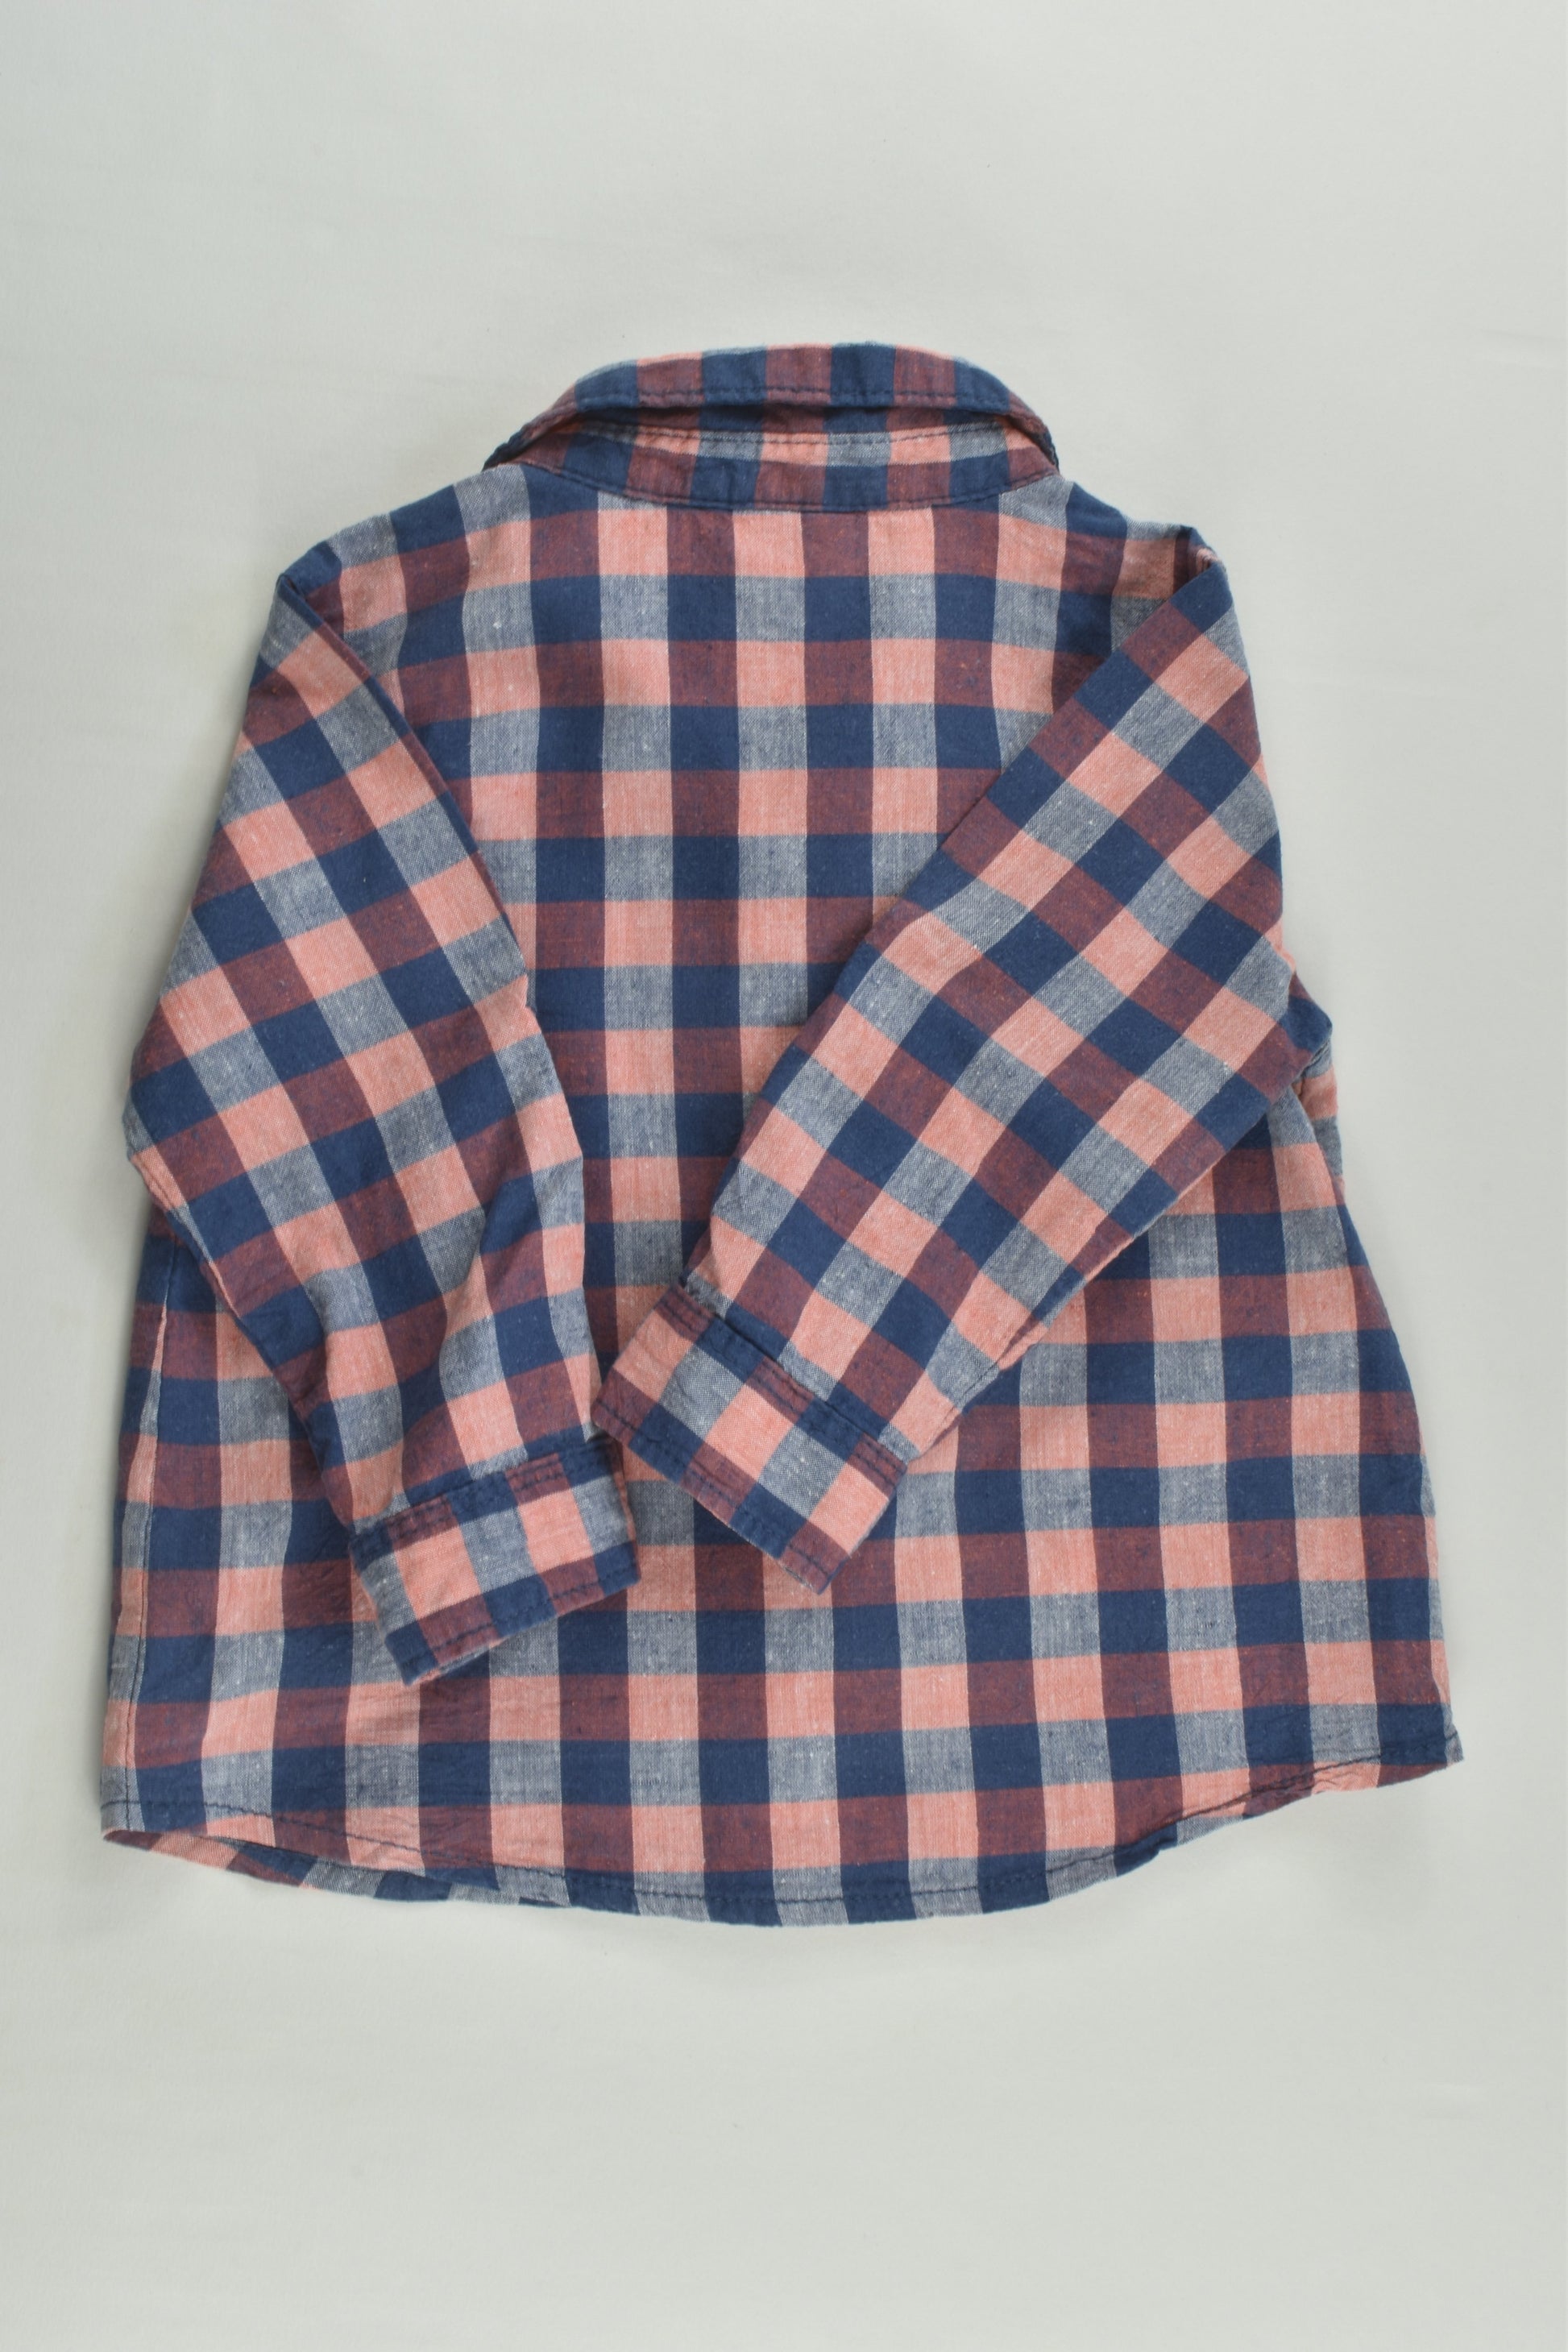 Target Size 0 Checked Shirt